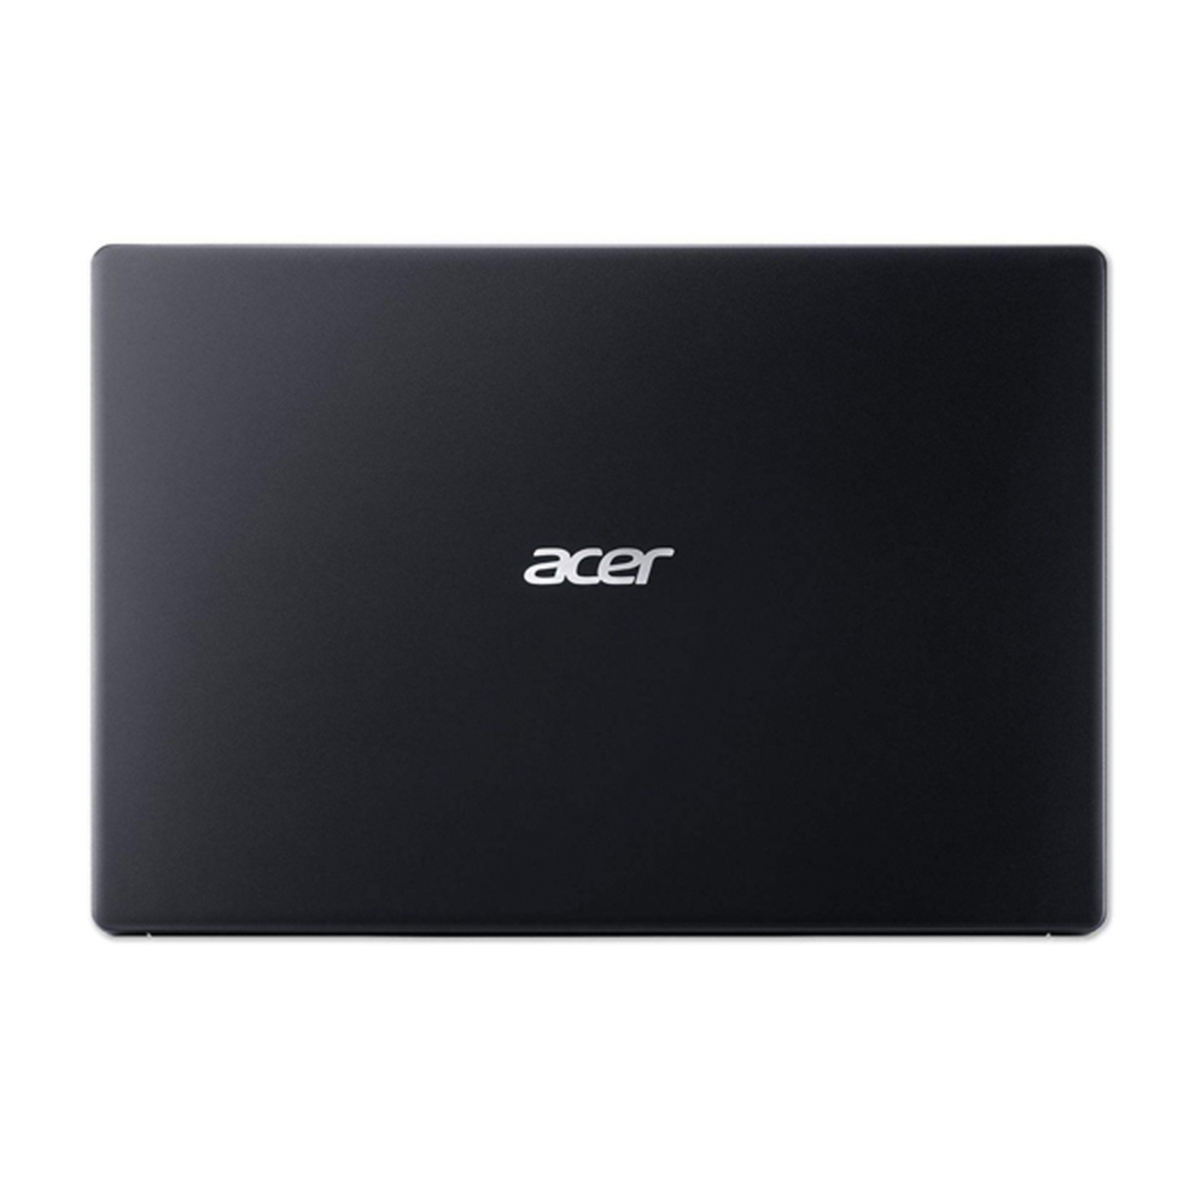 Acer Aspire A315-55G-52TF 15 inch Laptop